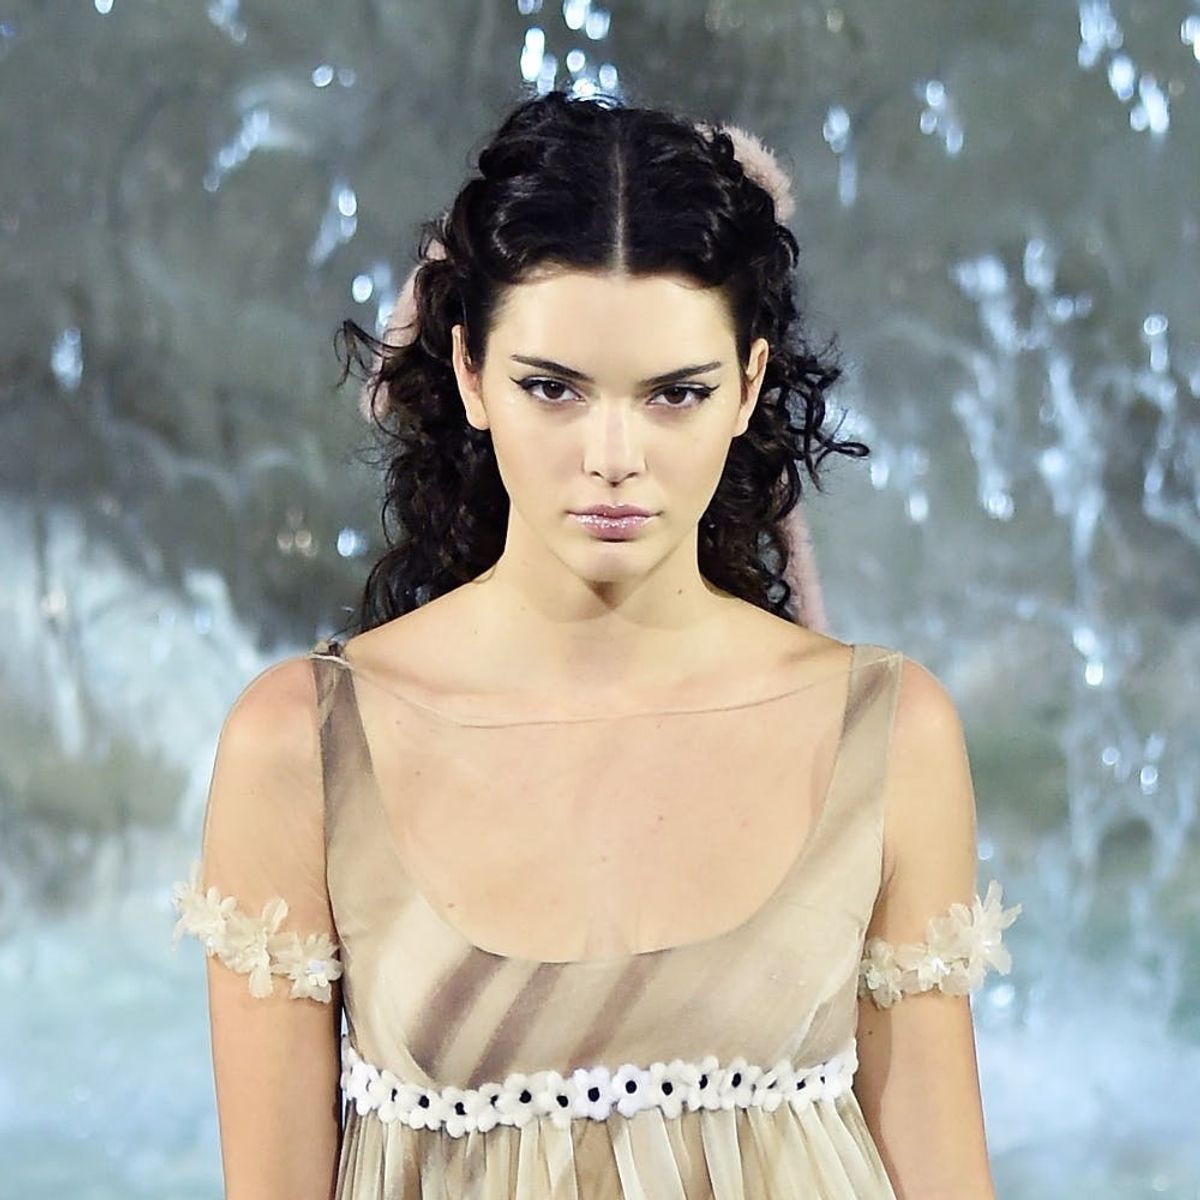 Kendall Jenner Just Made THE Biggest Vogue Cover of the Year